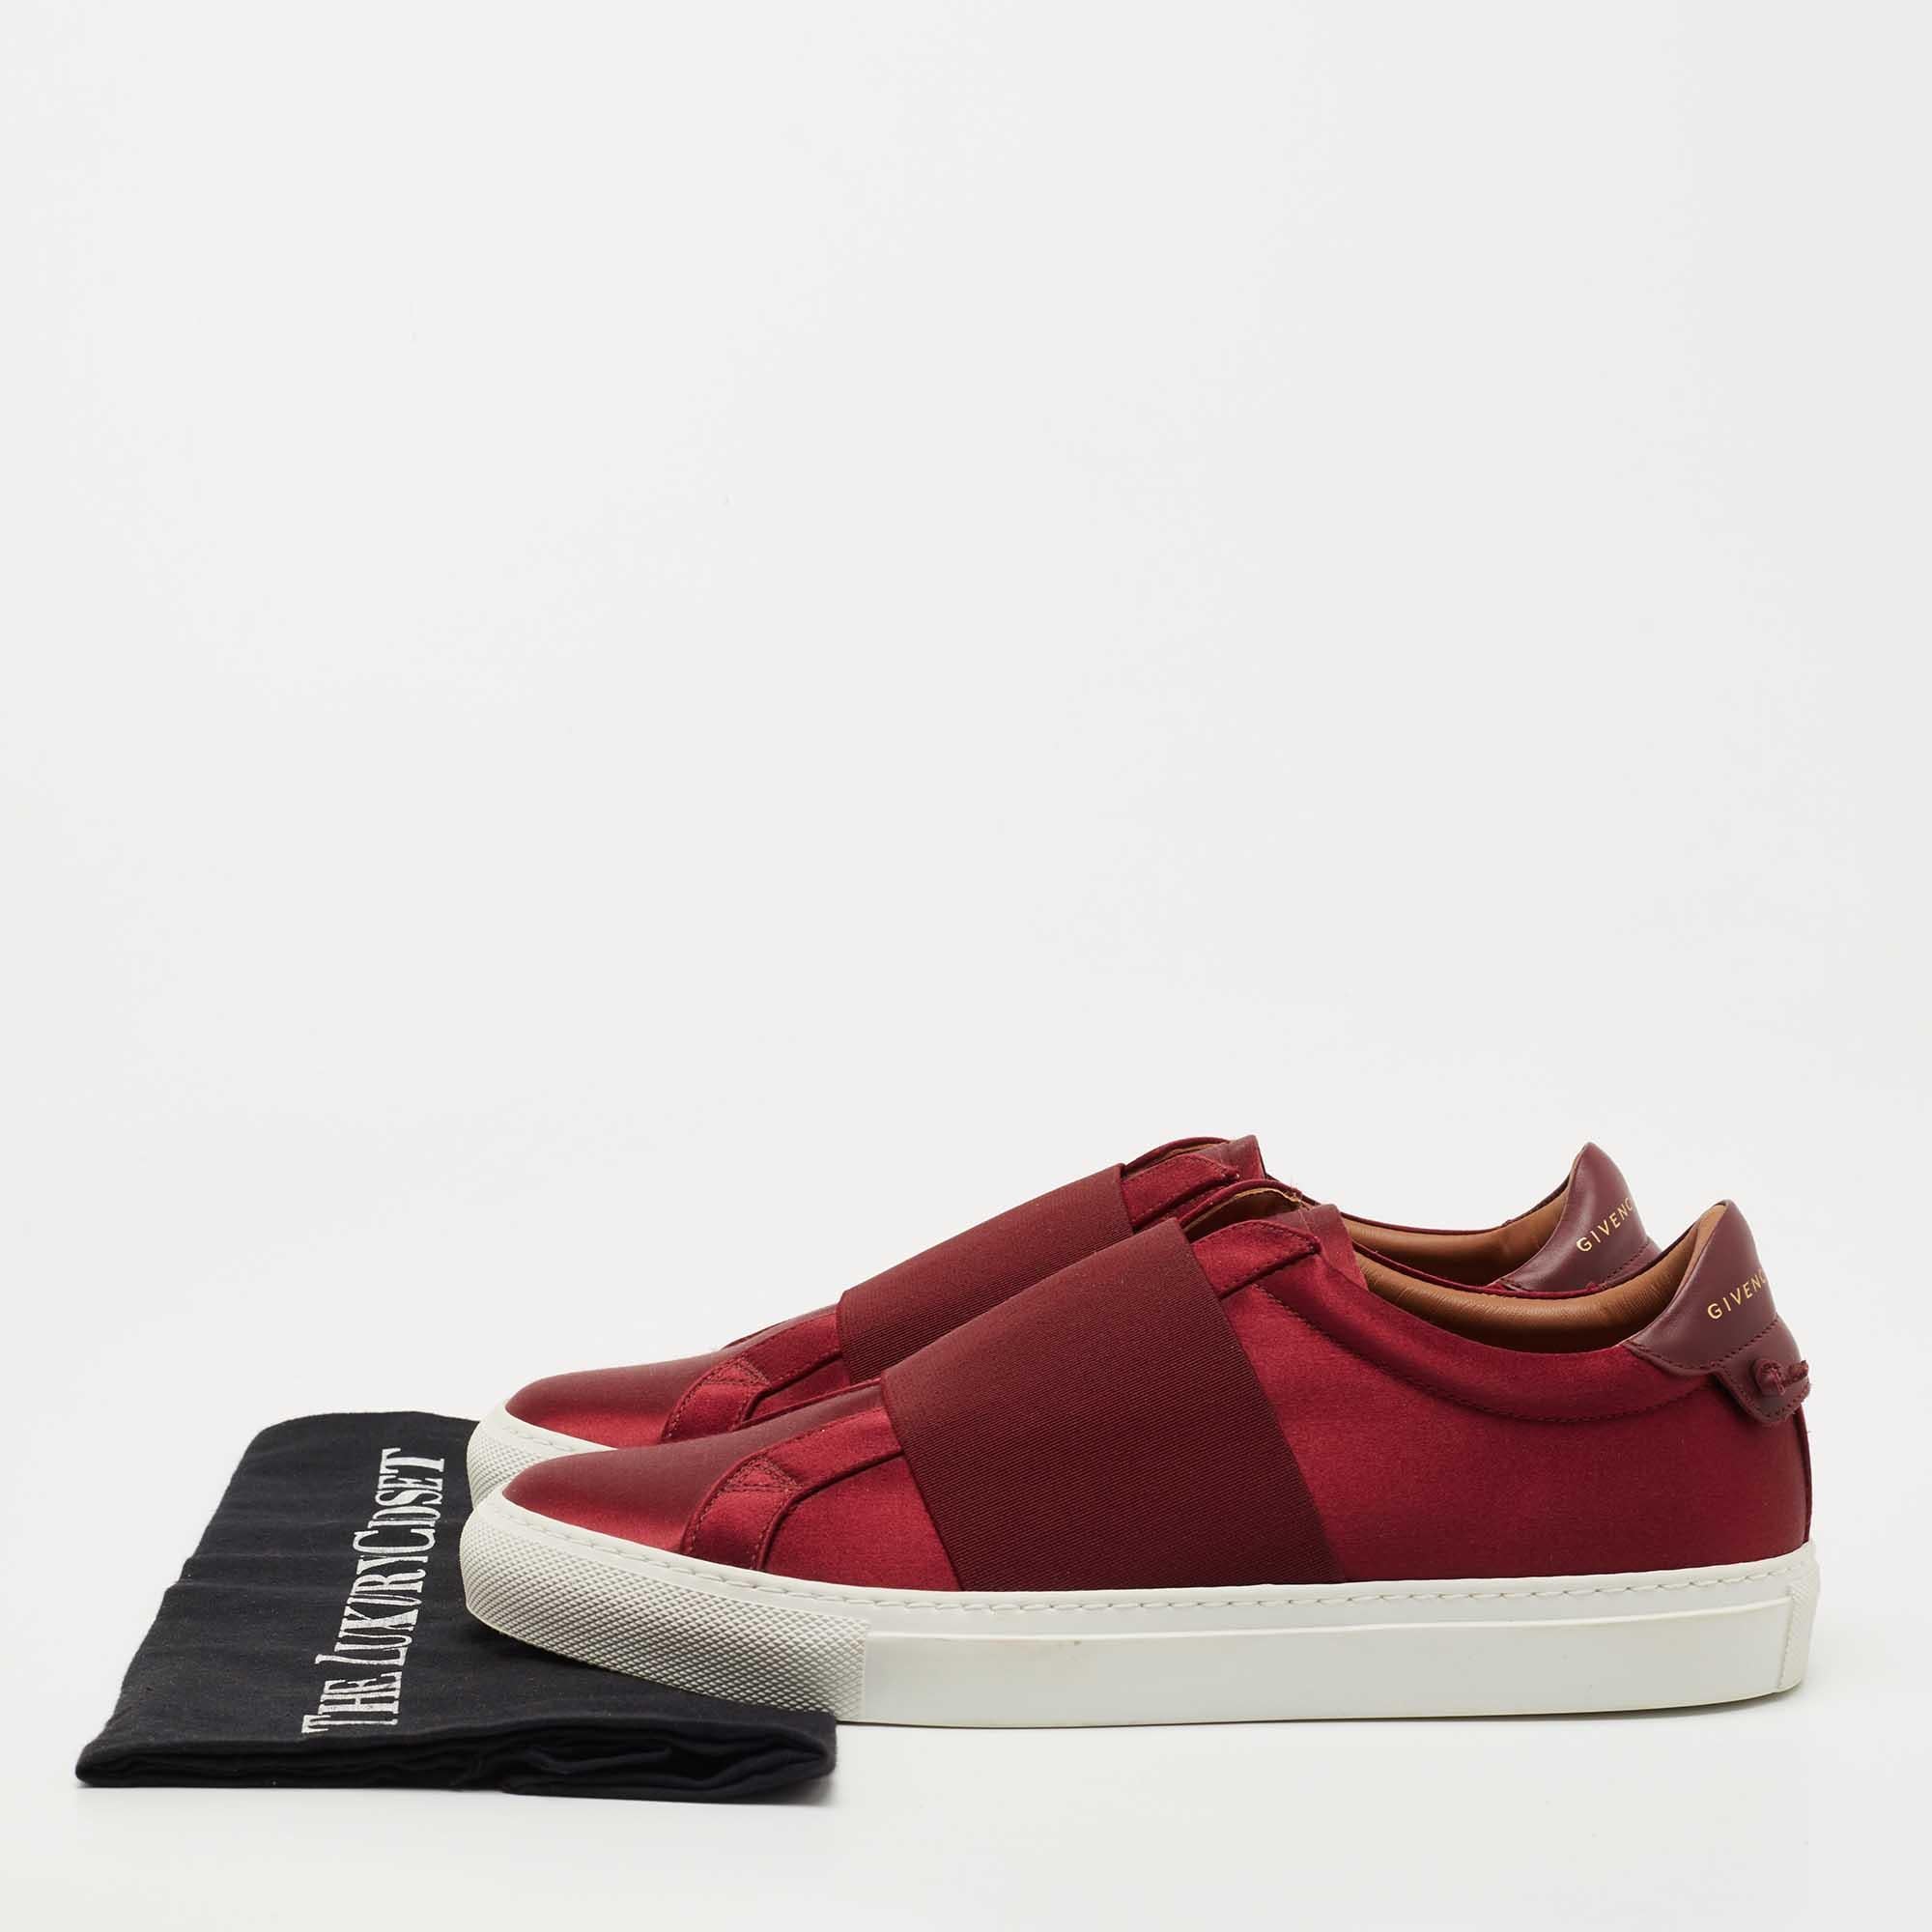 Givenchy Burgundy Satin and Elastic Band Slip On Sneakers Size 40 For Sale 4